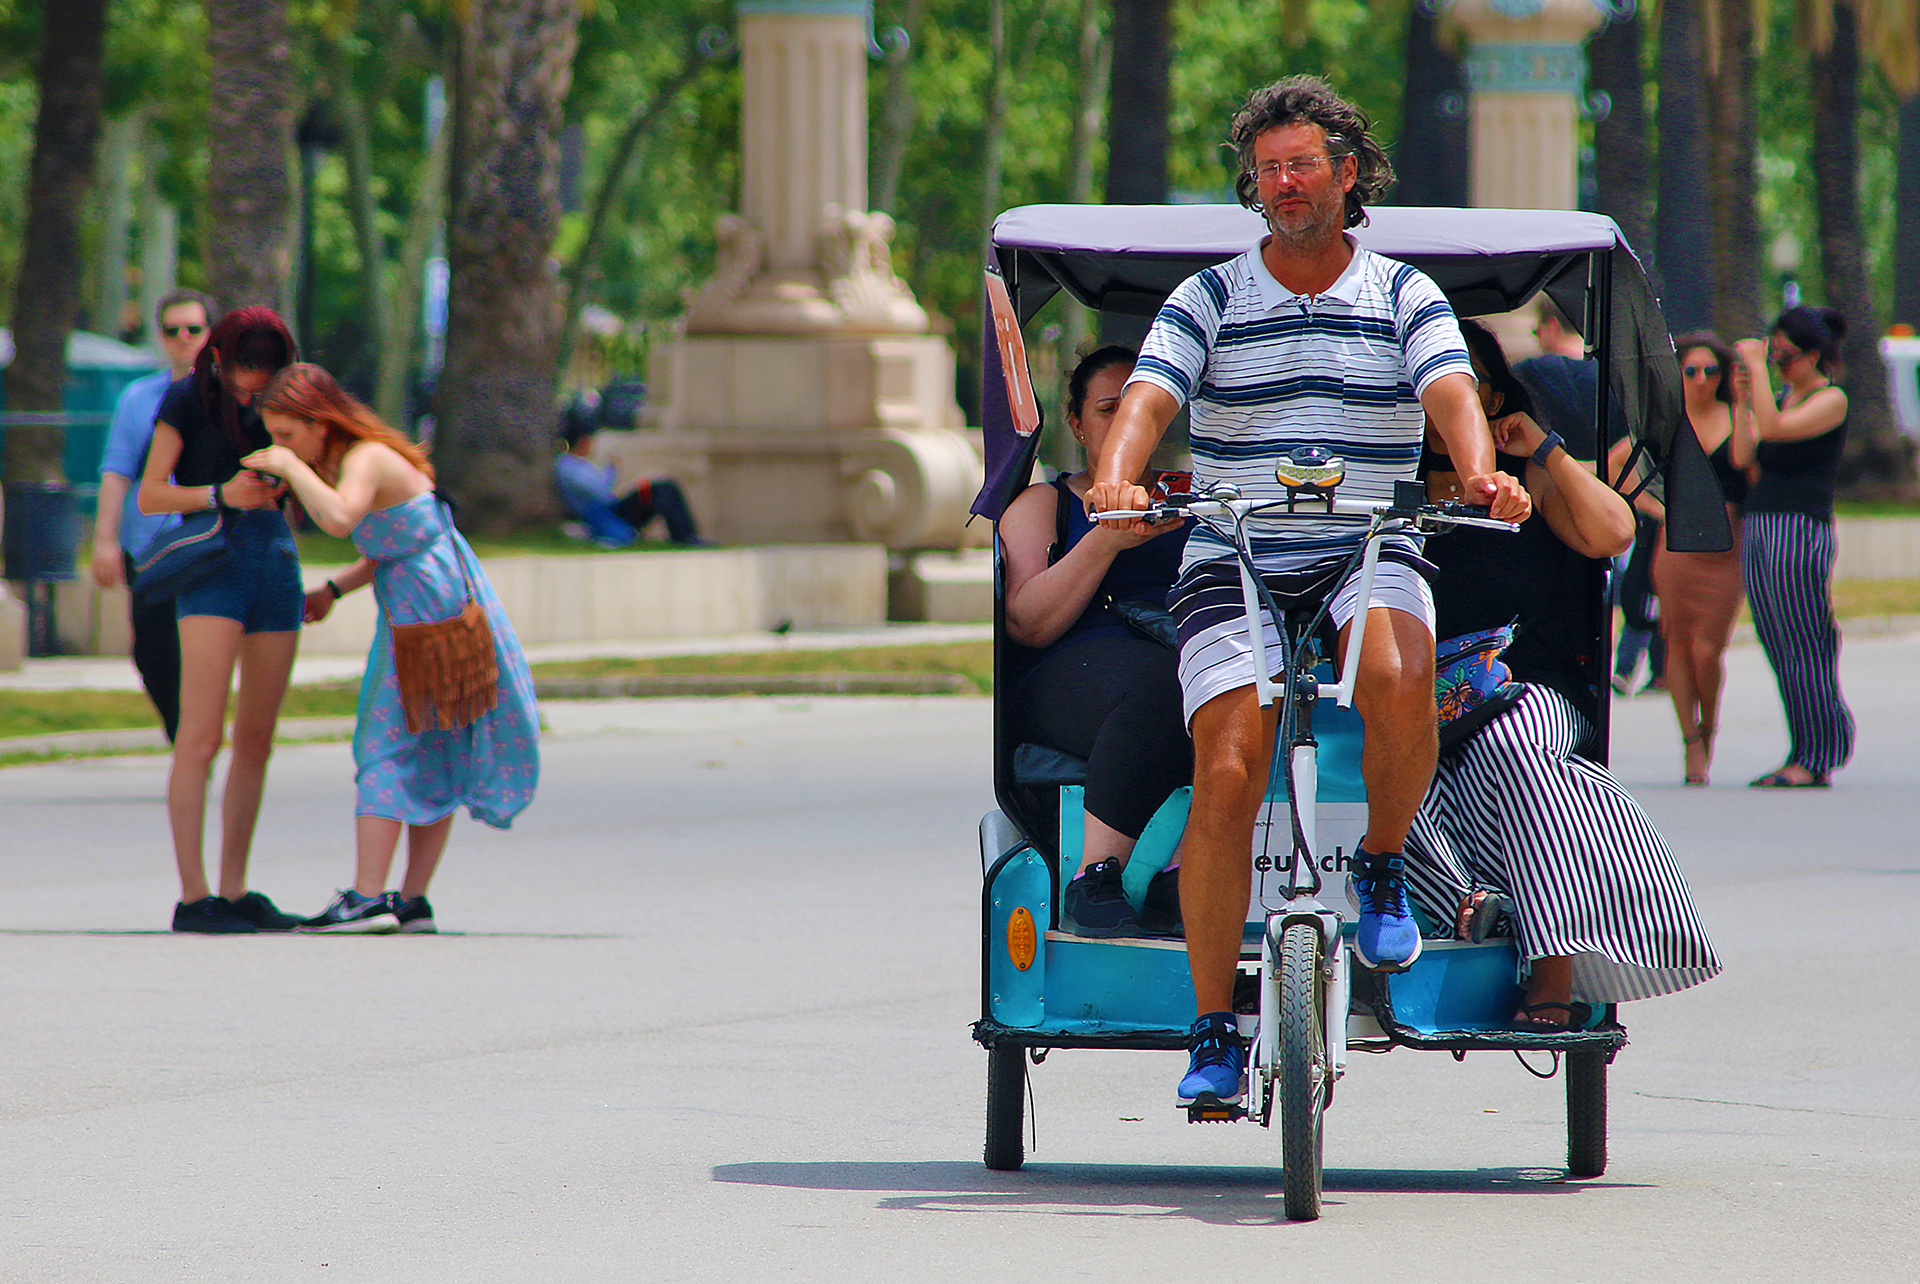 a man riding a bicycle with people in the back